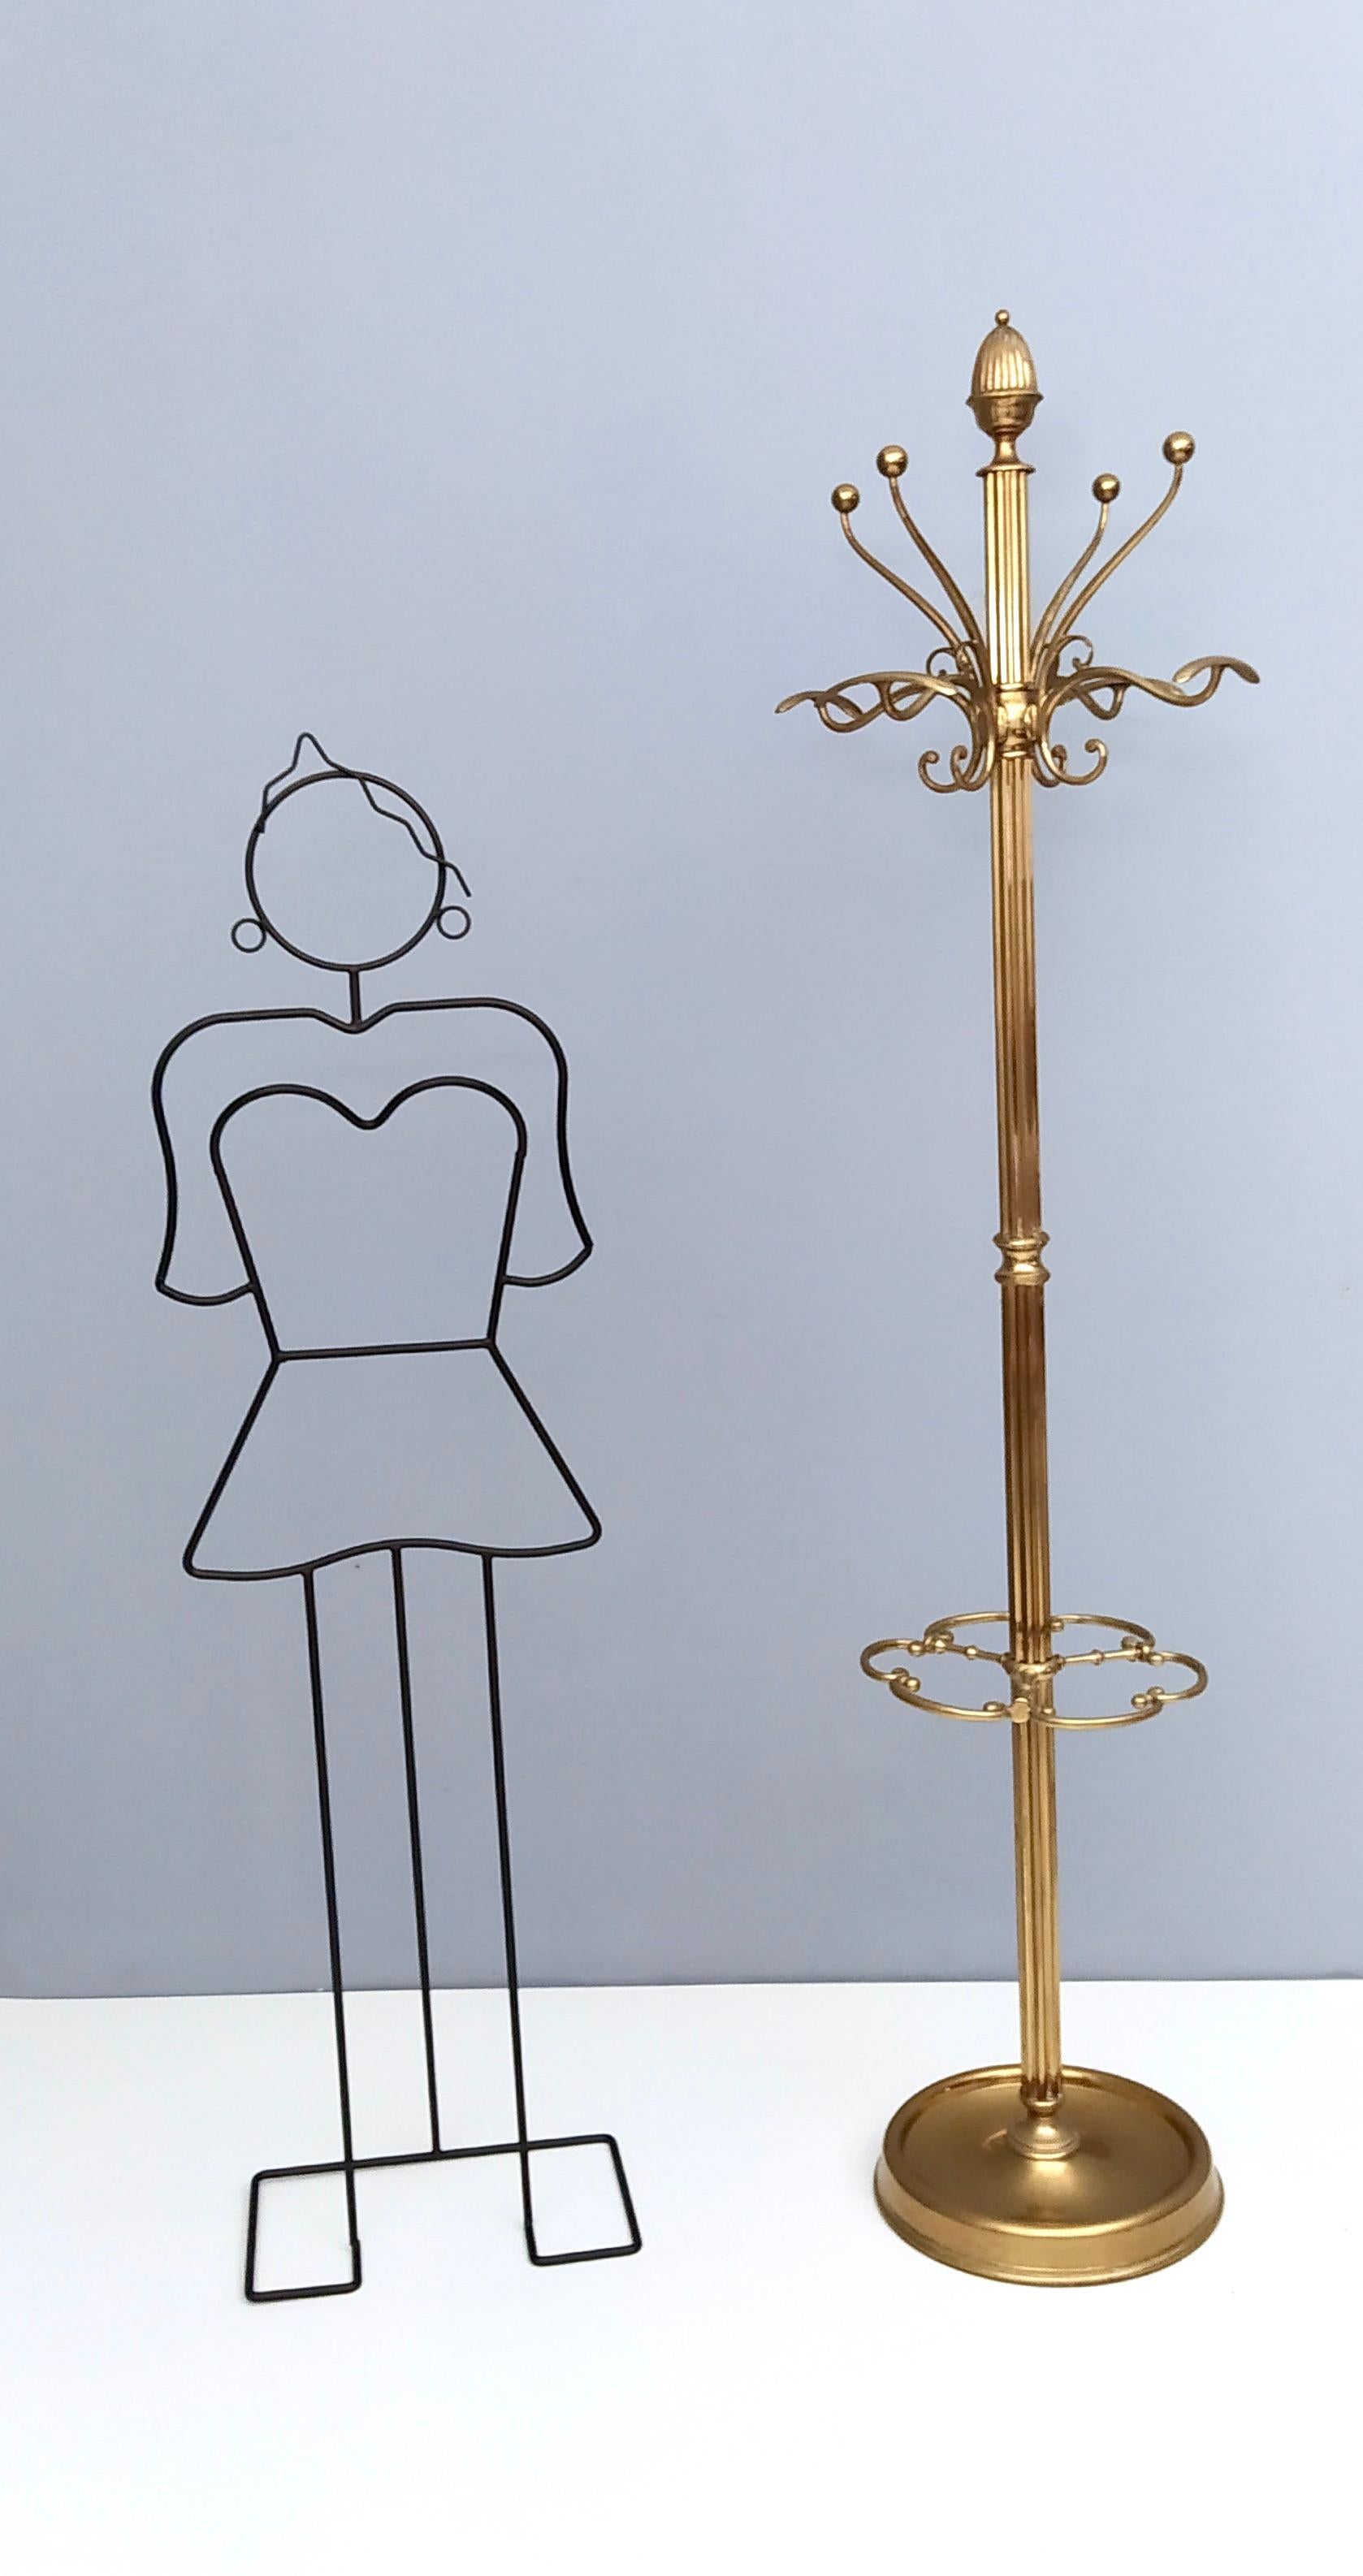 This hat and coat rack is made in solid brass, 1960s.
The hanging part is revolving and the lower part can also function as an umbrella stand.
It has its original patina which makes this piece even more beautiful.
This rack is a vintage piece,